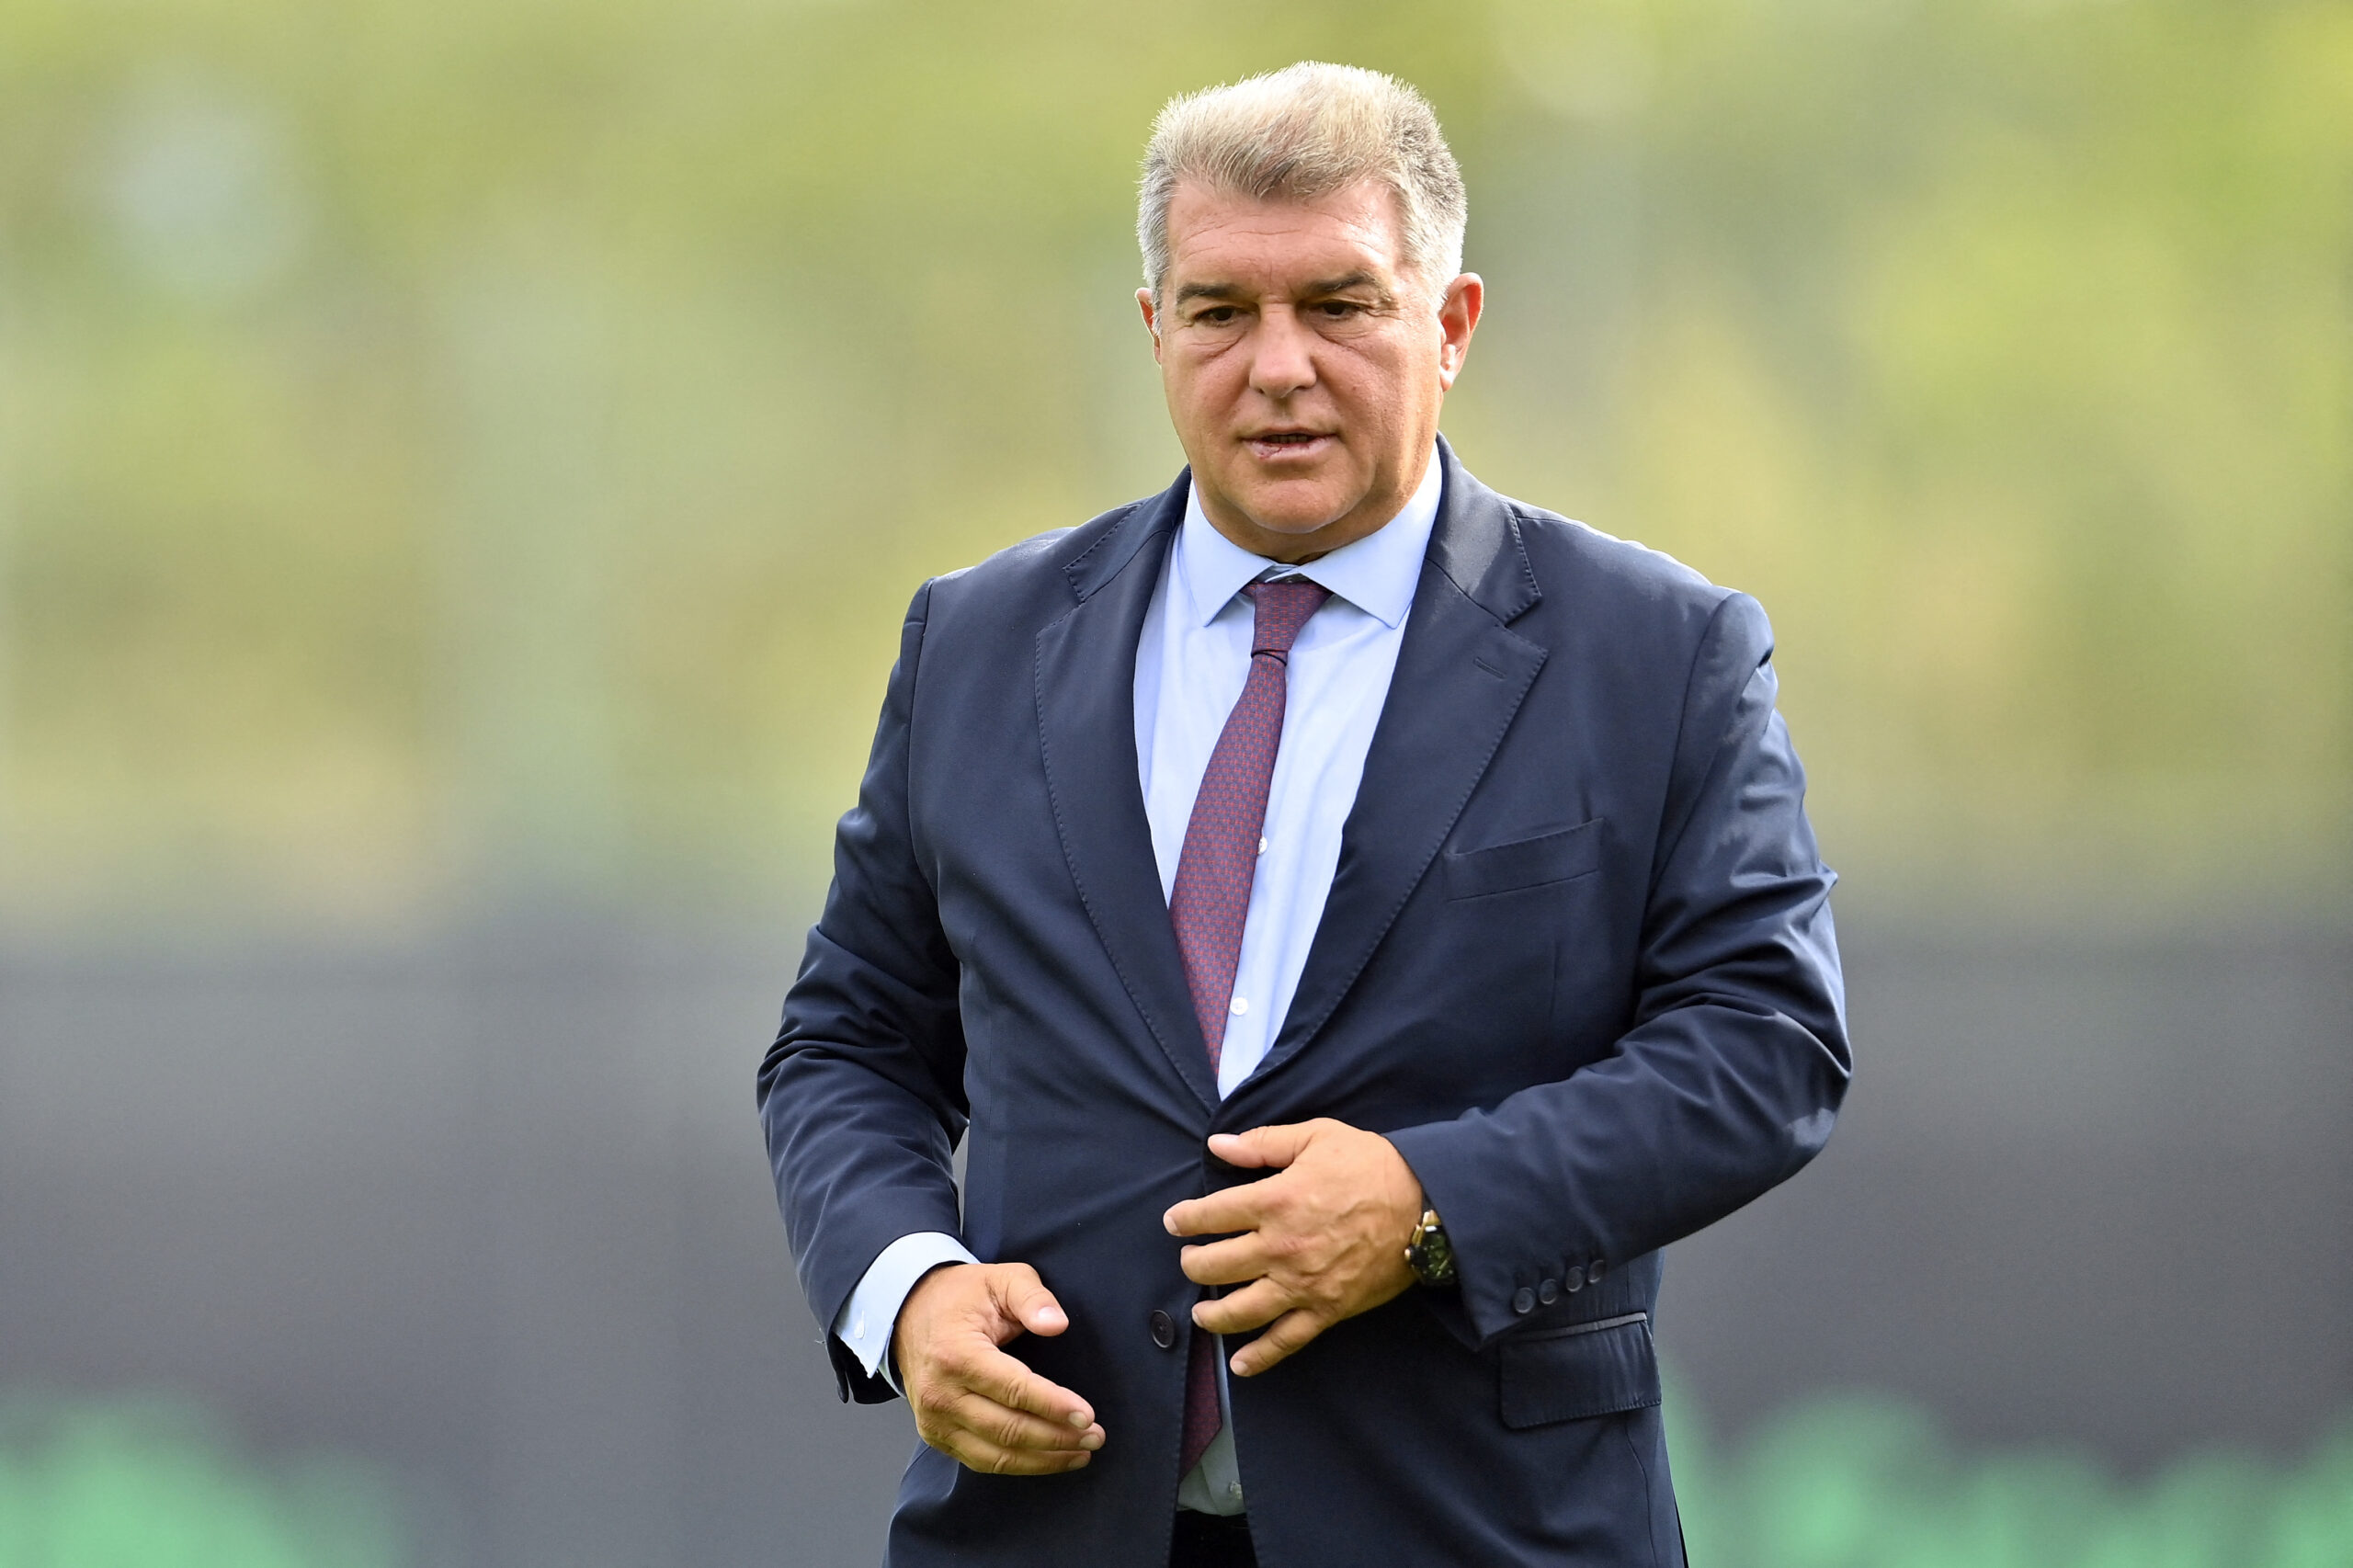 FC Barcelona President Joan Laporta is pictured at the Joan Gamper training ground in Sant Joan Despi, near Barcelona, on September 2, 2023. Barcelona signed Atletico Madrid forward Joao Felix and Manchester City defender Joao Cancelo on loan until the end of the season.